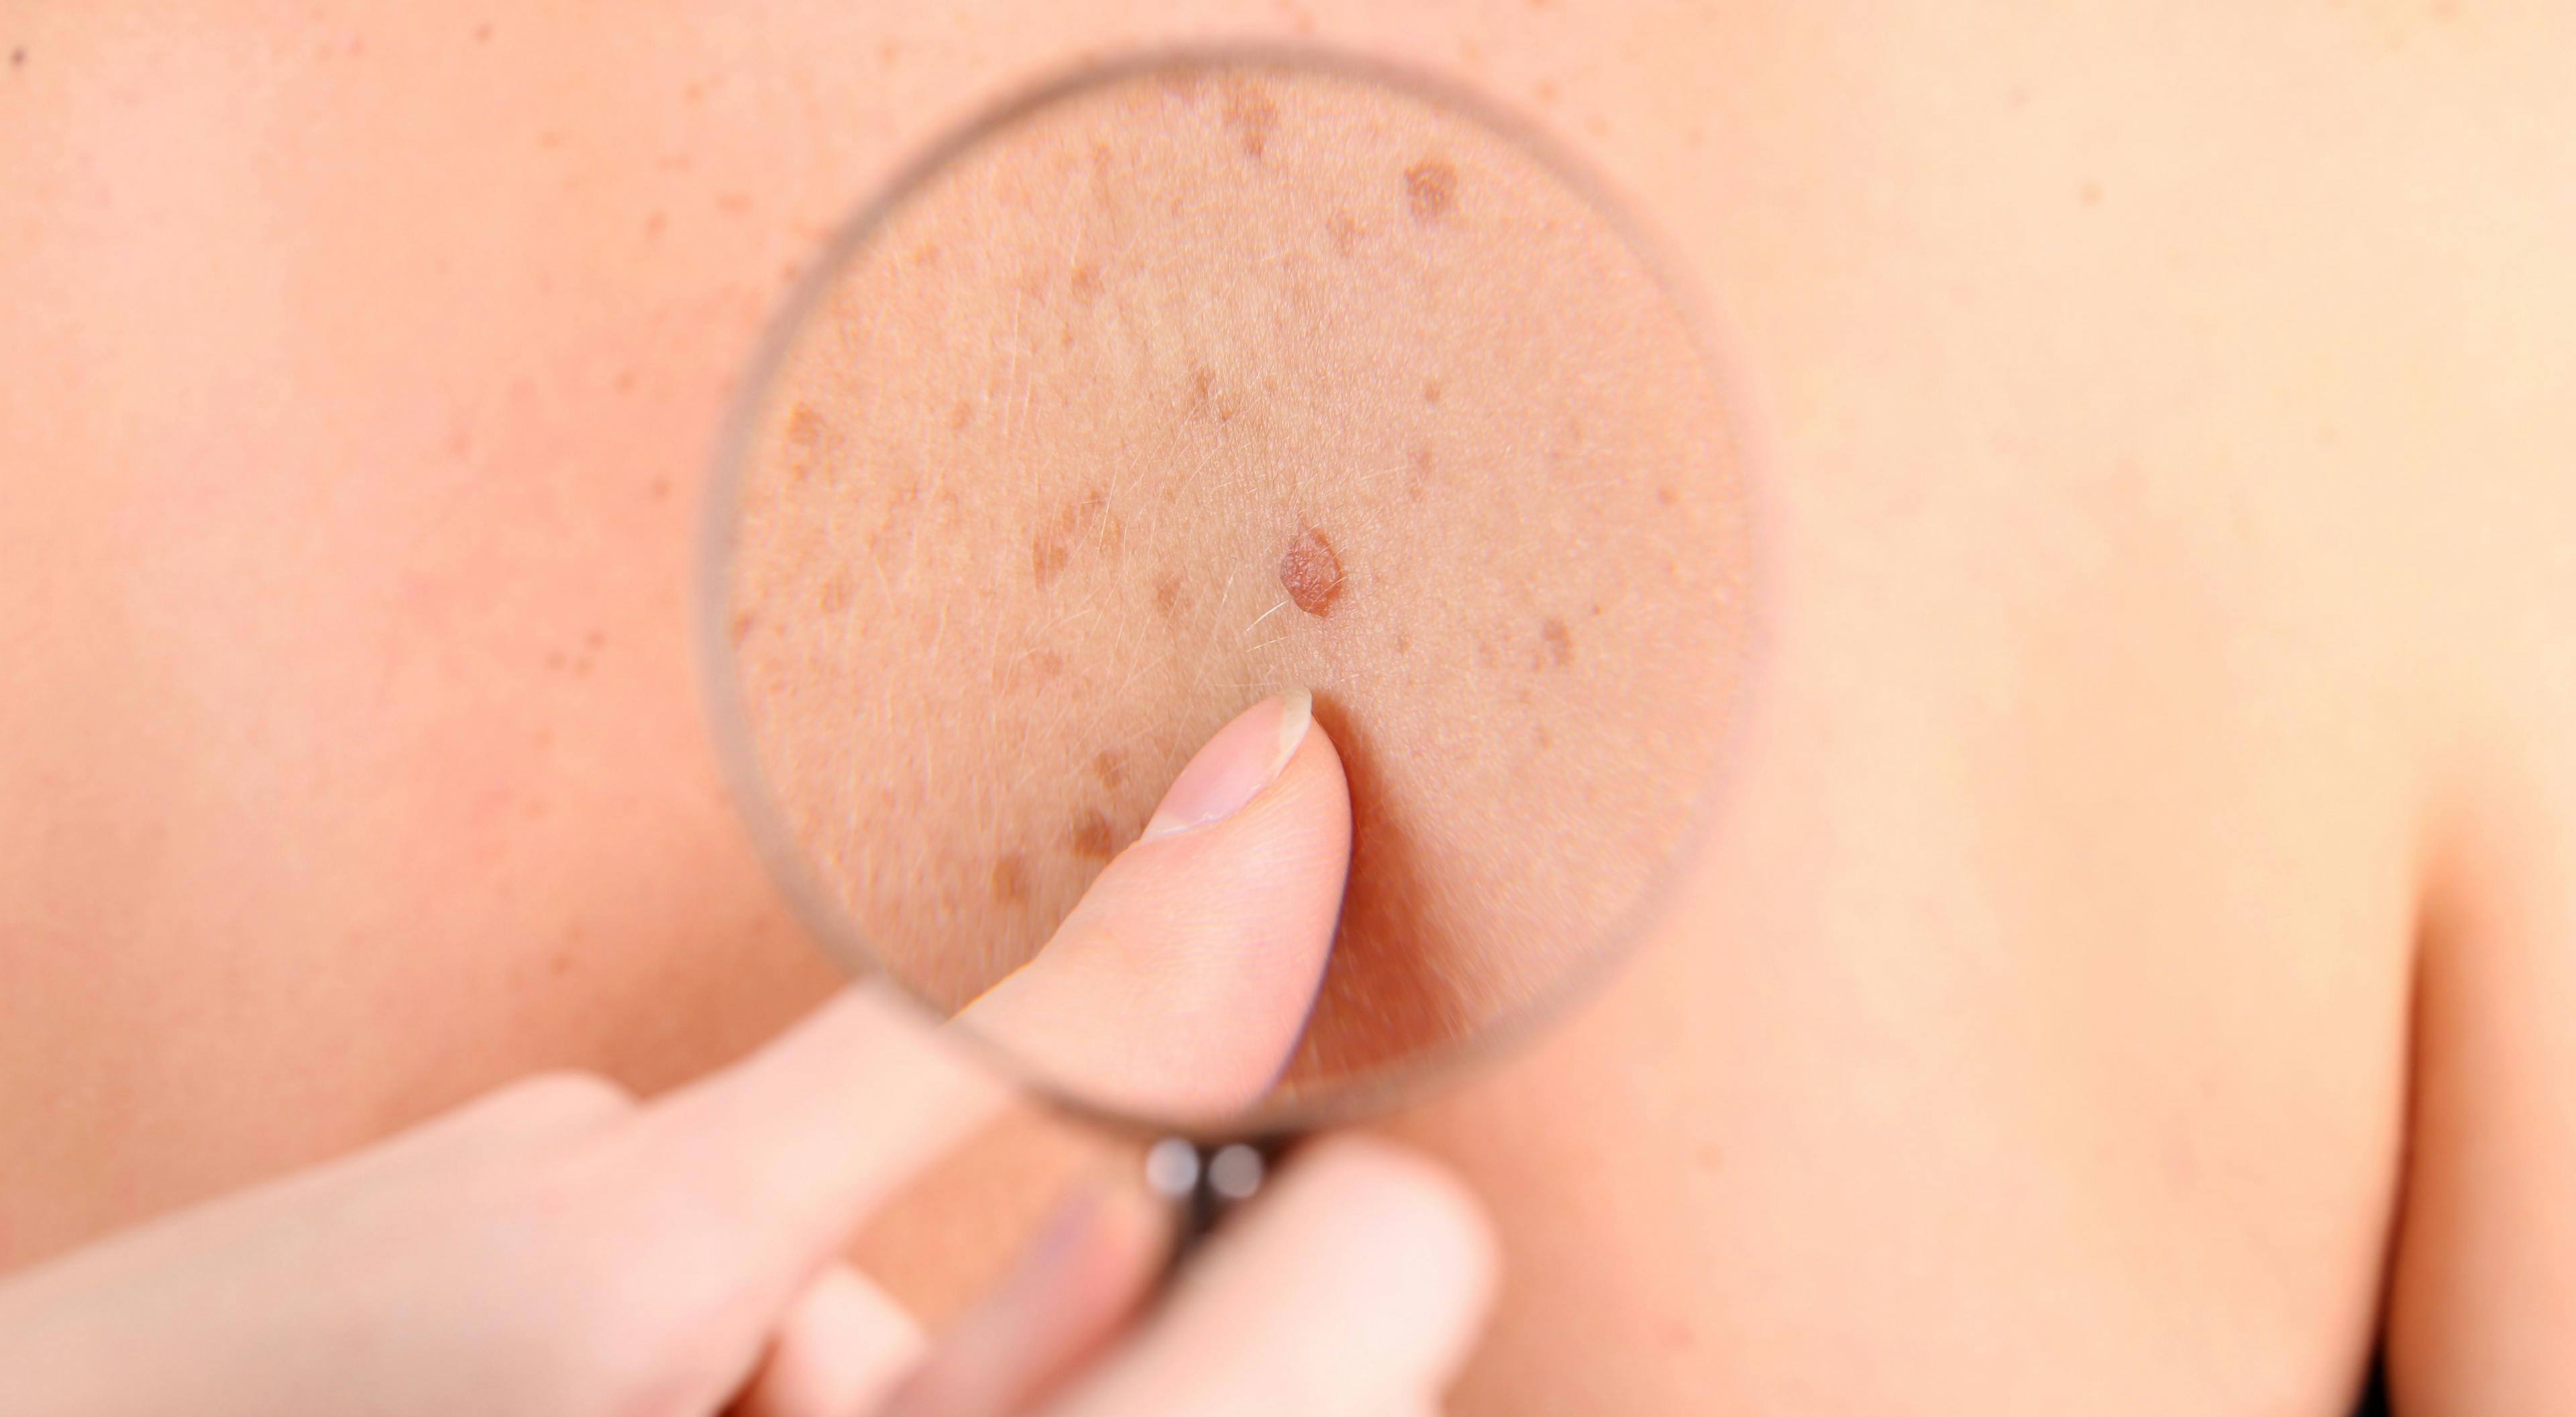 High Frequency of Common Skin Cancer May Warrant More Intensive Cancer Screening